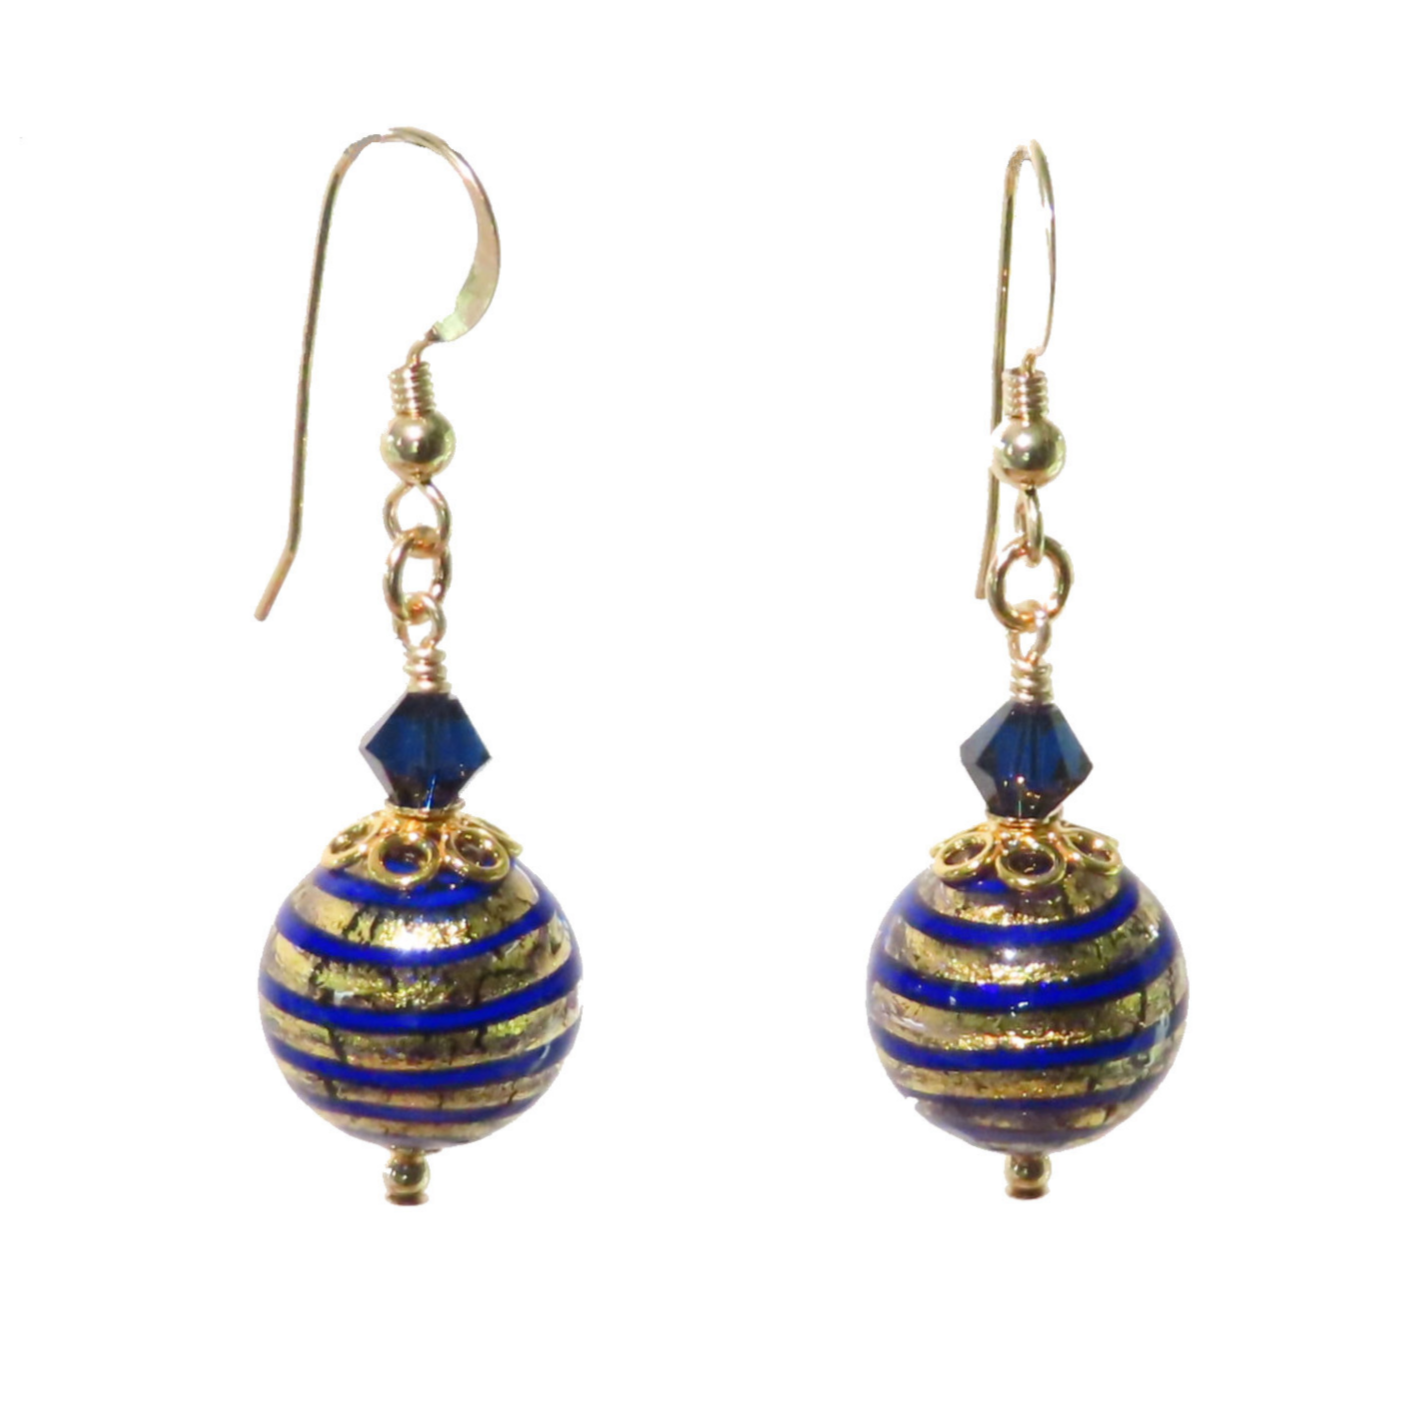 a pair of blue and gold earrings on a white background